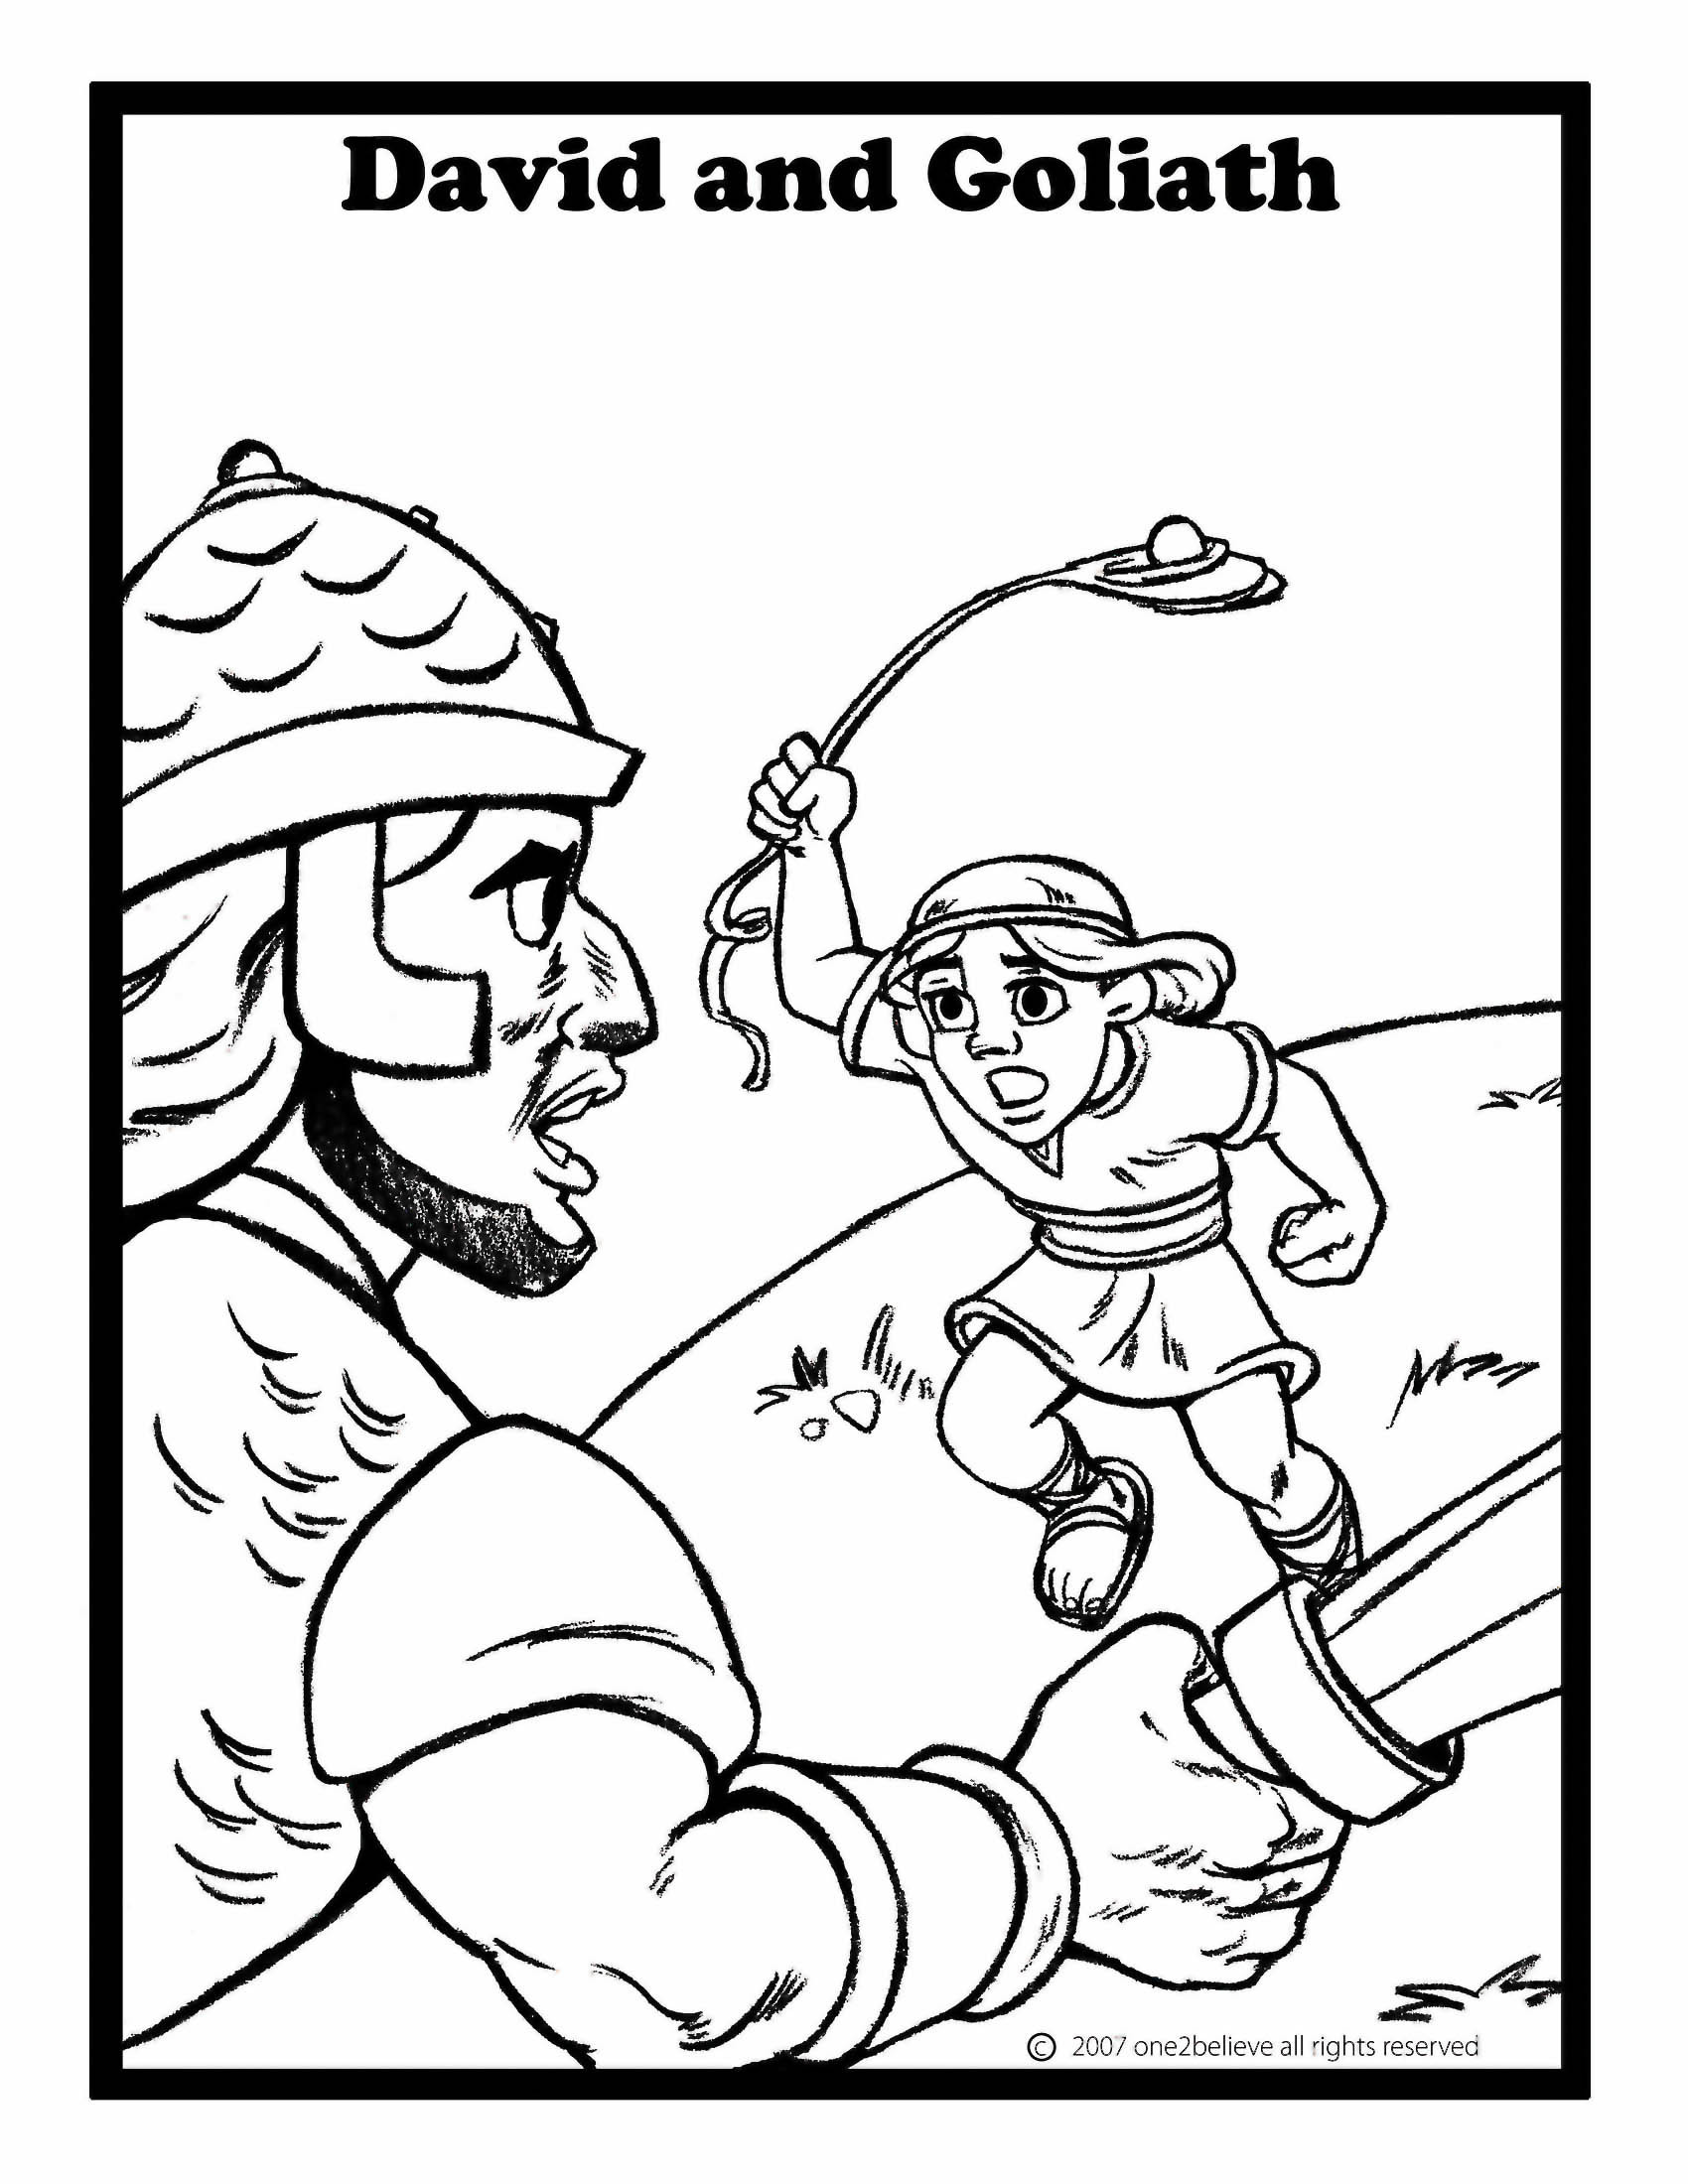 David And Goliath Coloring Pages
 Preschool Class Room Gateway s Kids Ministry